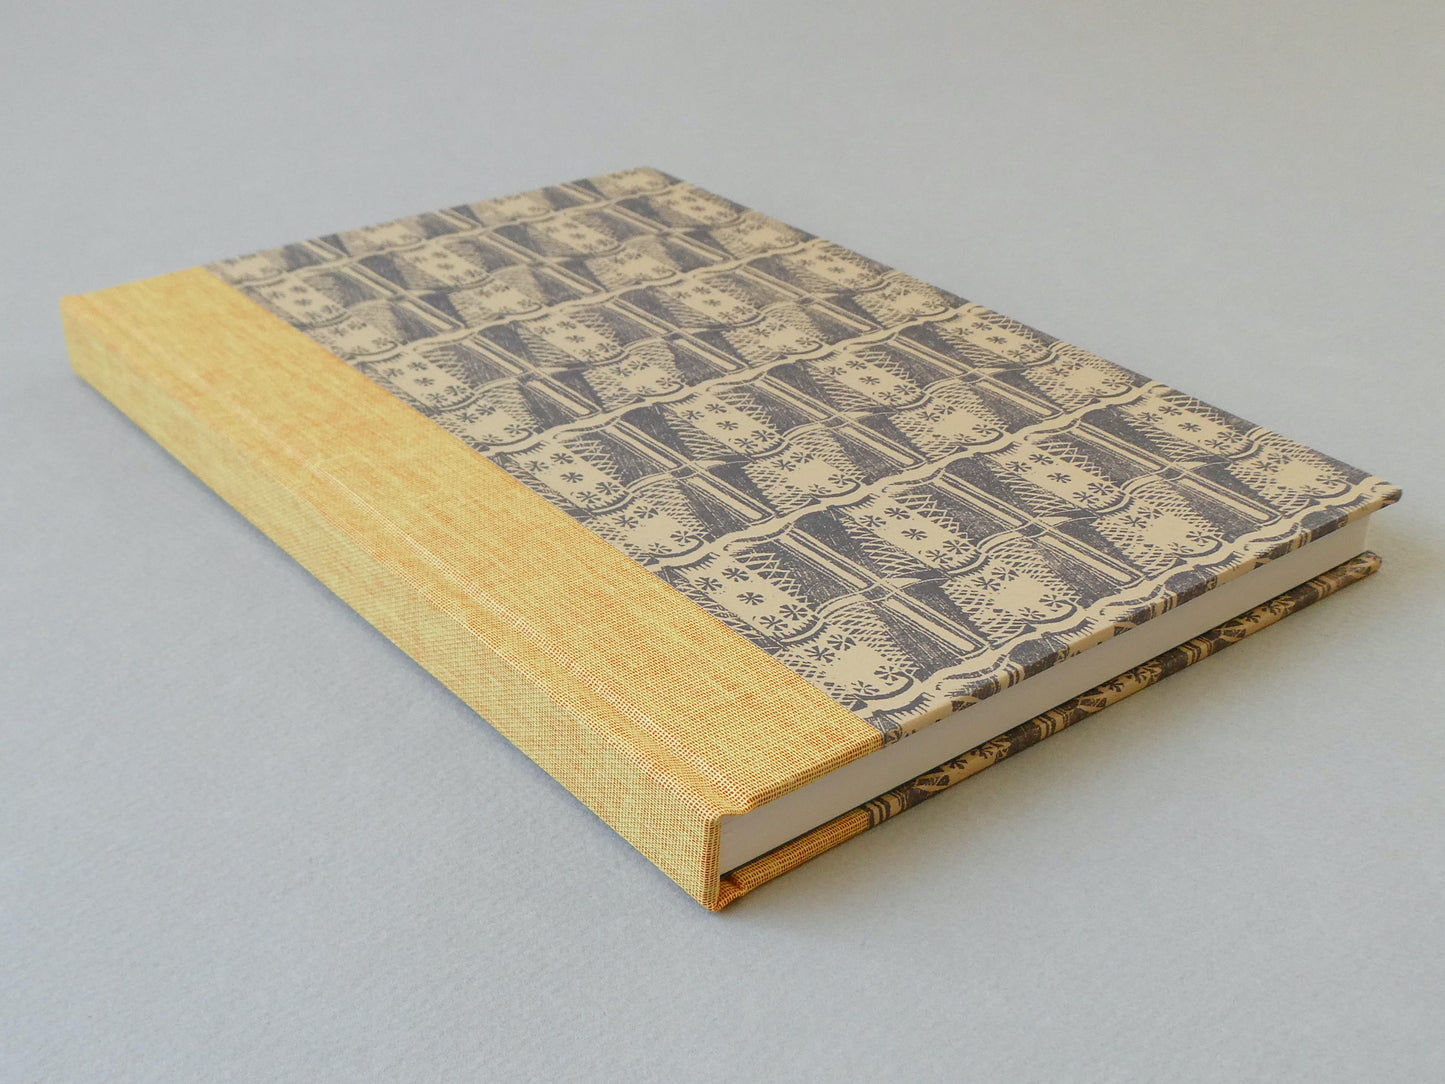 Enid Marx Sketchbook with Bamboo pattern lying down